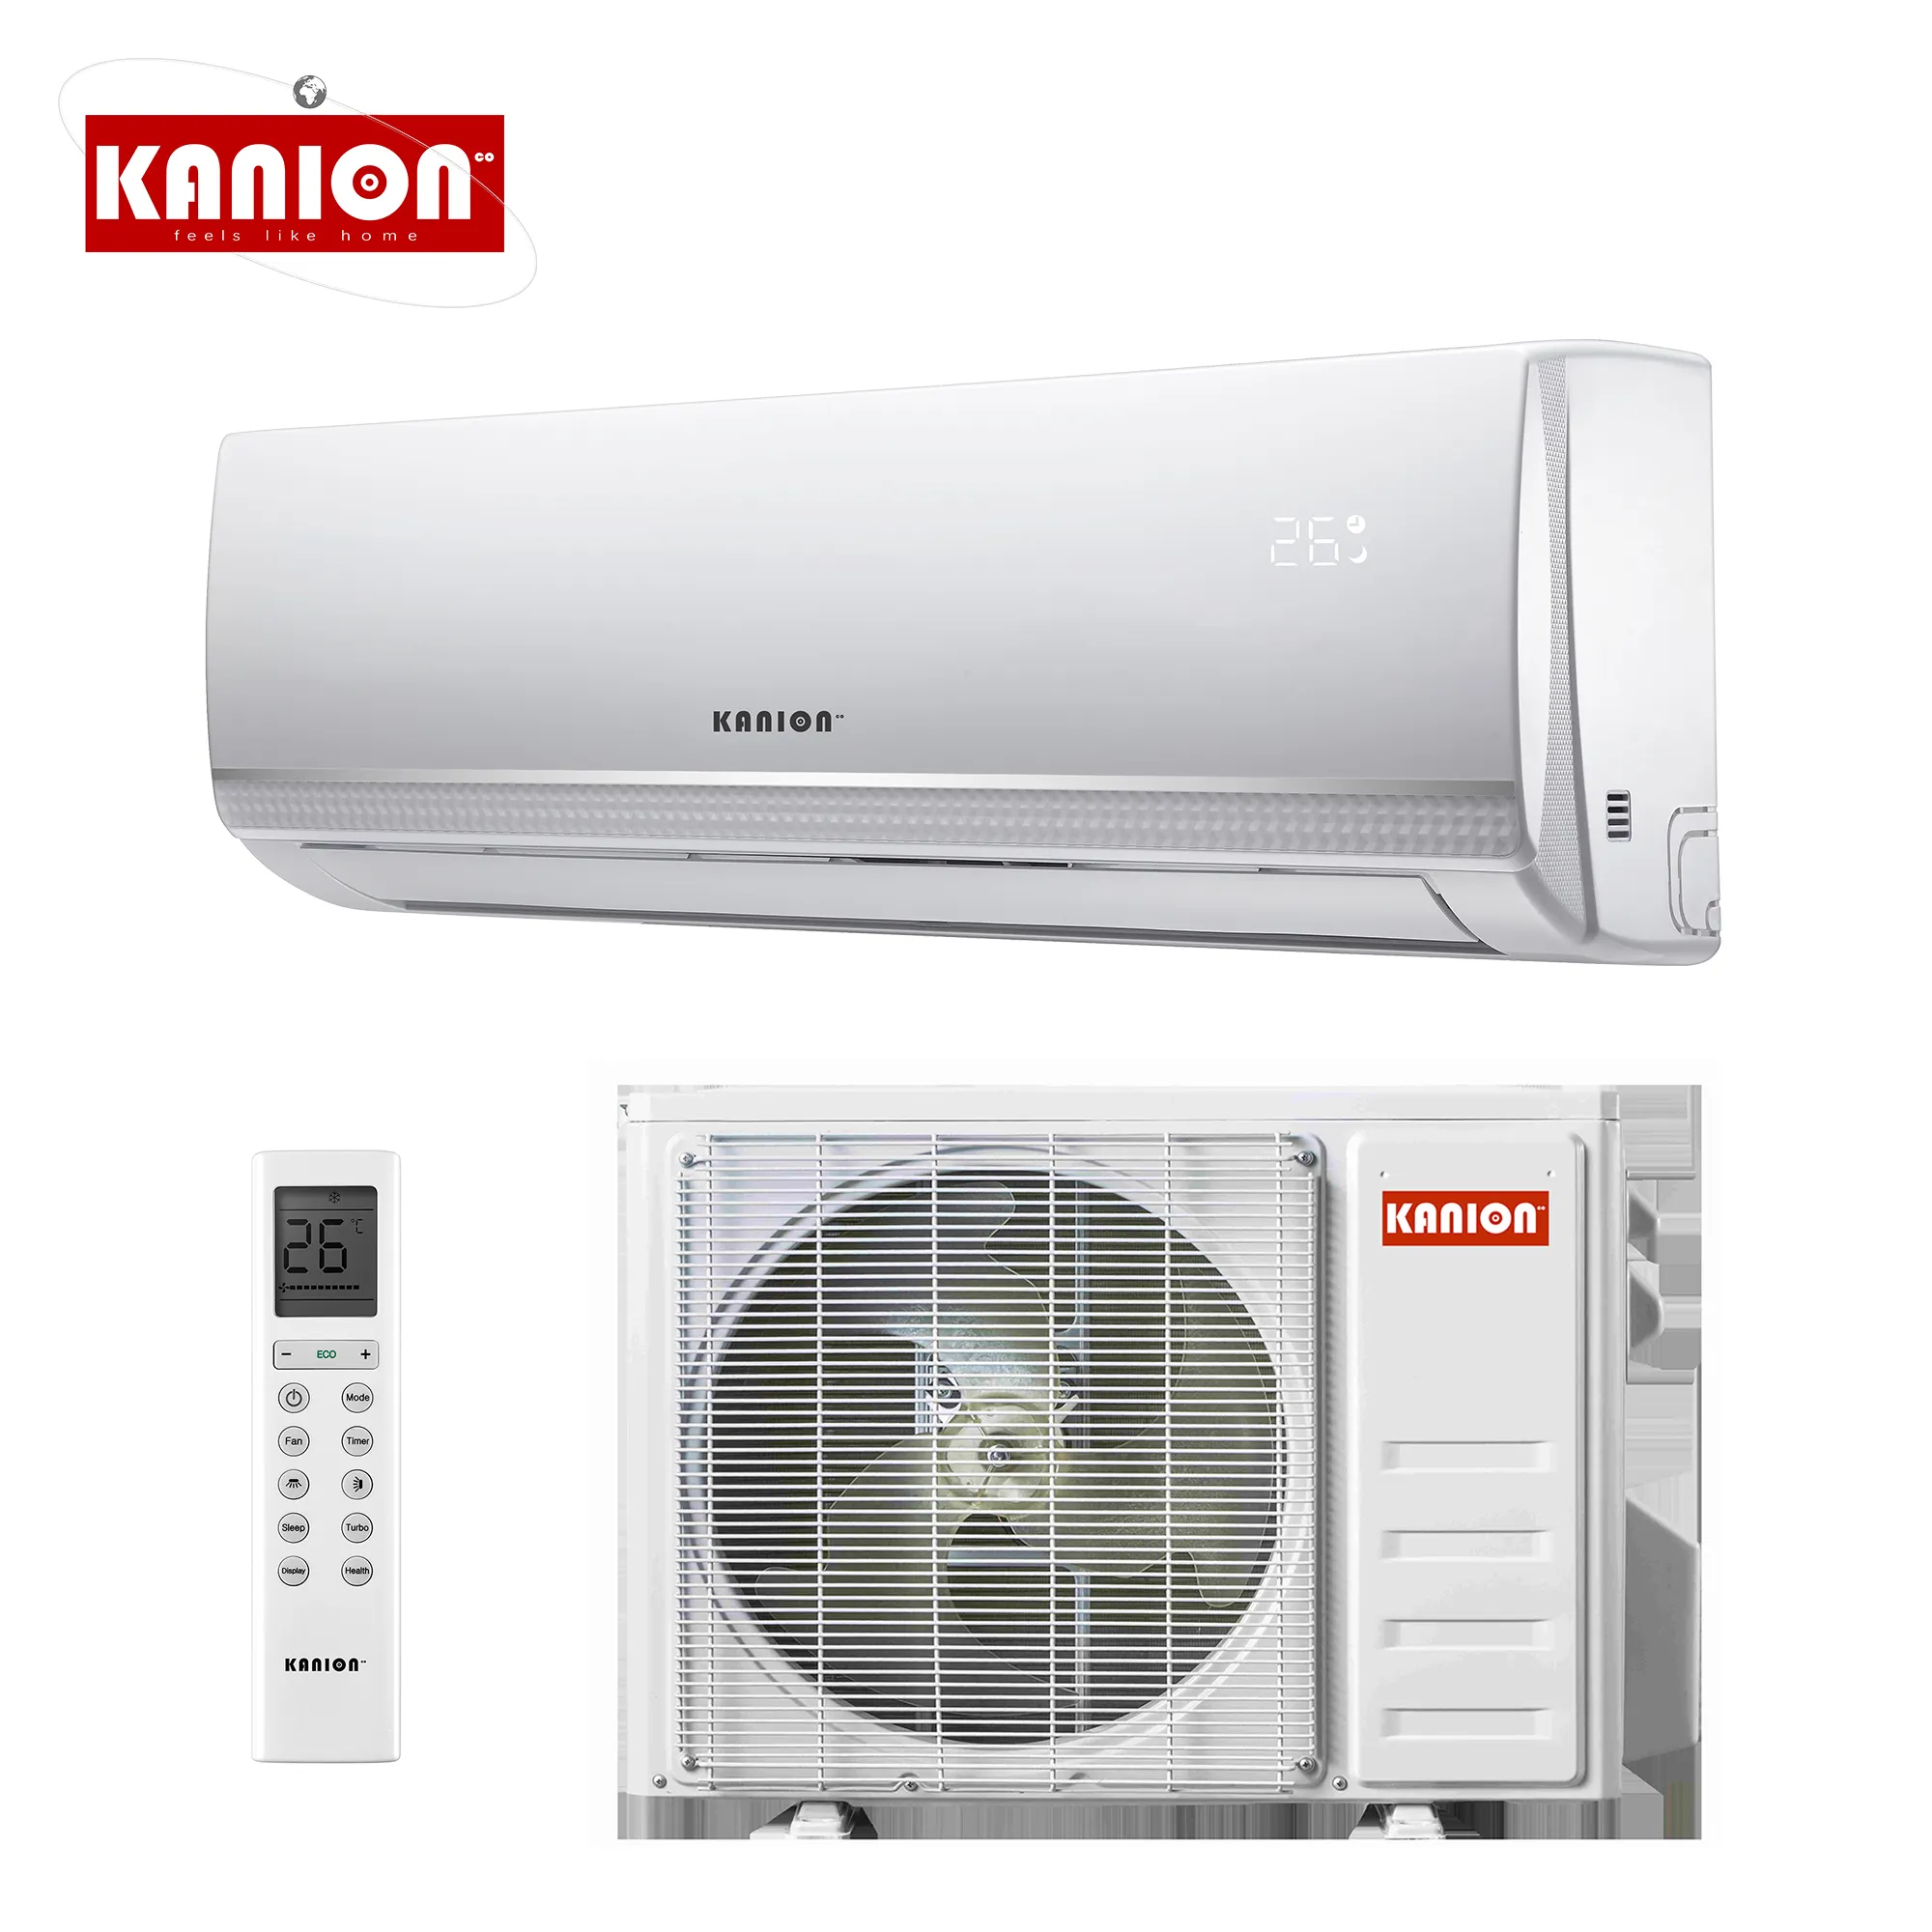 Kanion Chile market standard Wholesale Heating And Cooling 1HP 9000btu split air conditioner 220V